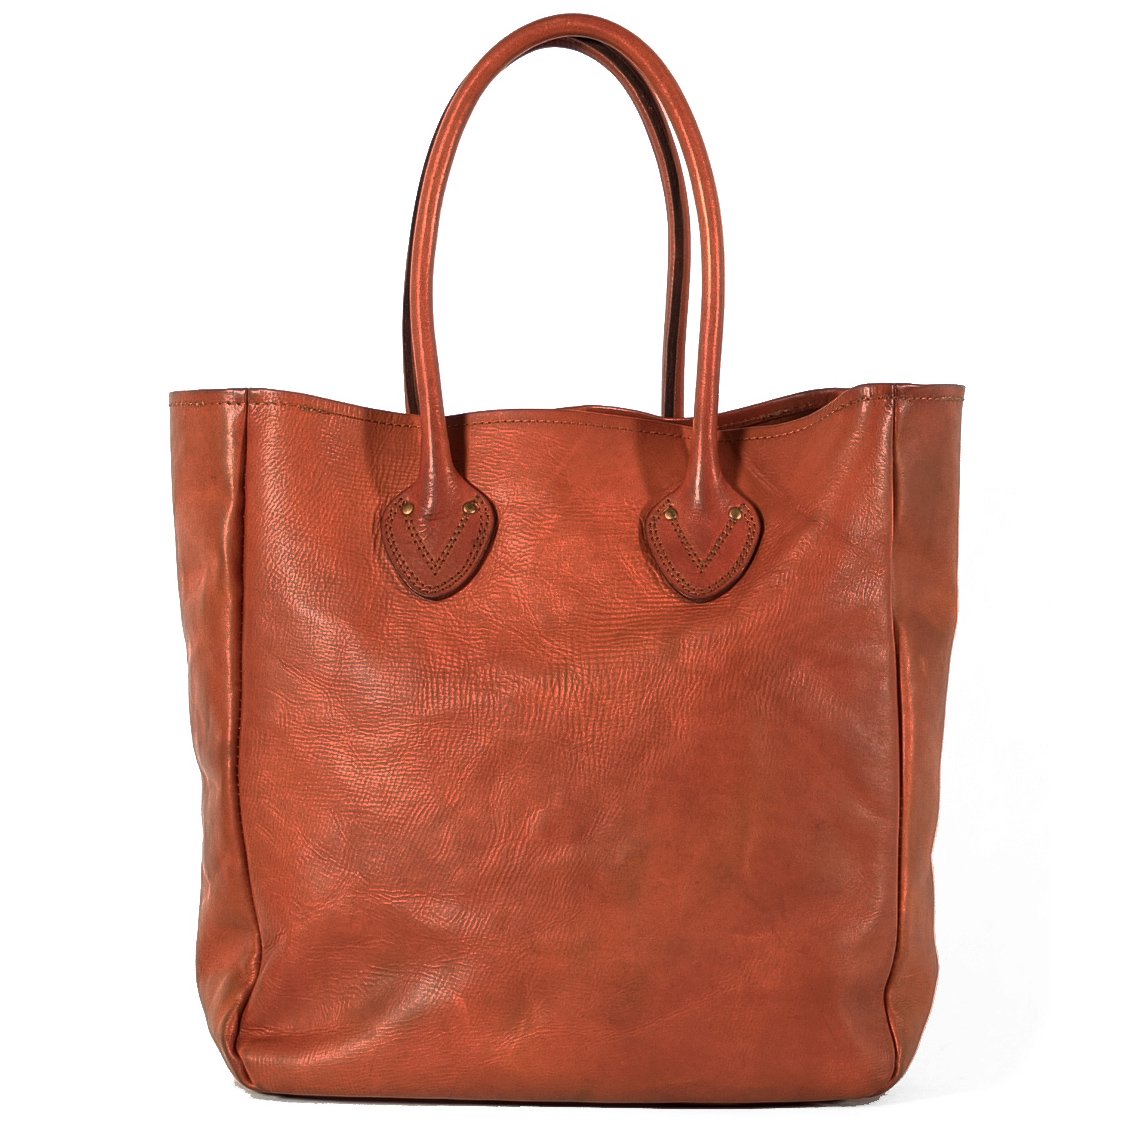 LEATHER OLD TOTE BAG-LARGE - ANCHOR MILLS STORE